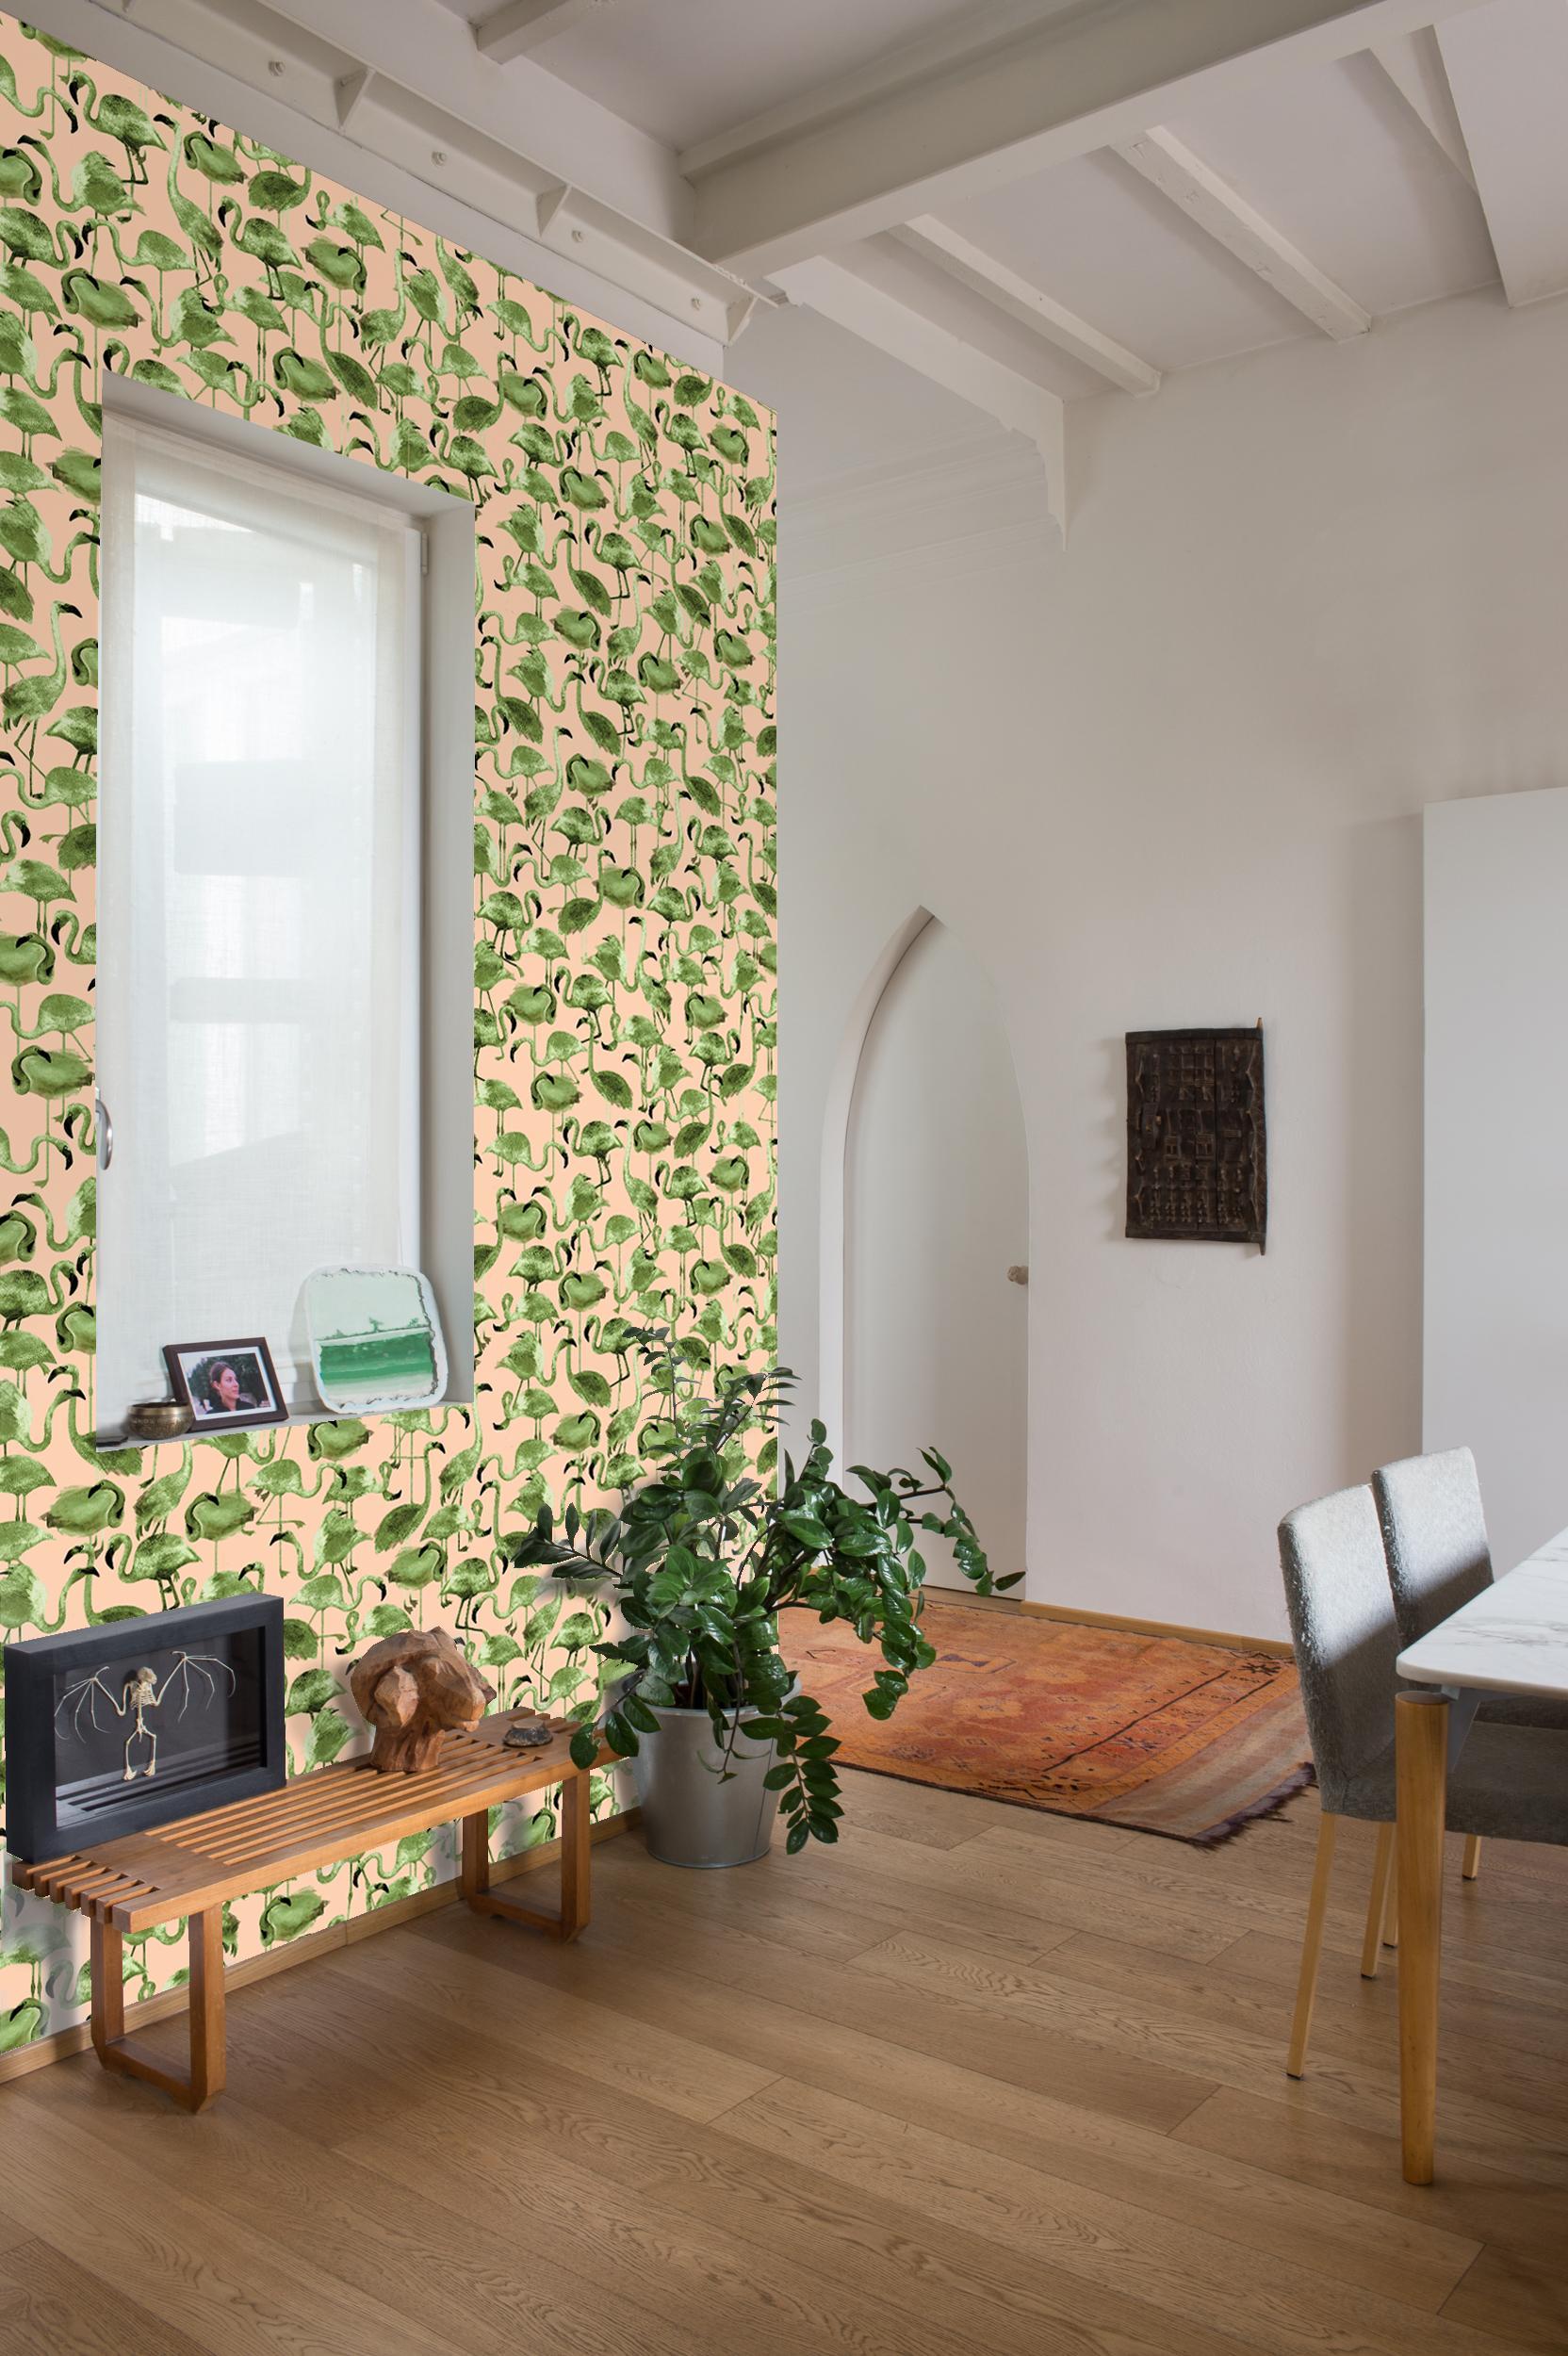 NIVA re-dresses the walls of your home with nature. A collection of wallpapers inspired by traditional artistic techniques. Flamingo is inspired by acrylic tempera painting, while the tropical fruit of the Costa Rica series is made with the graphite